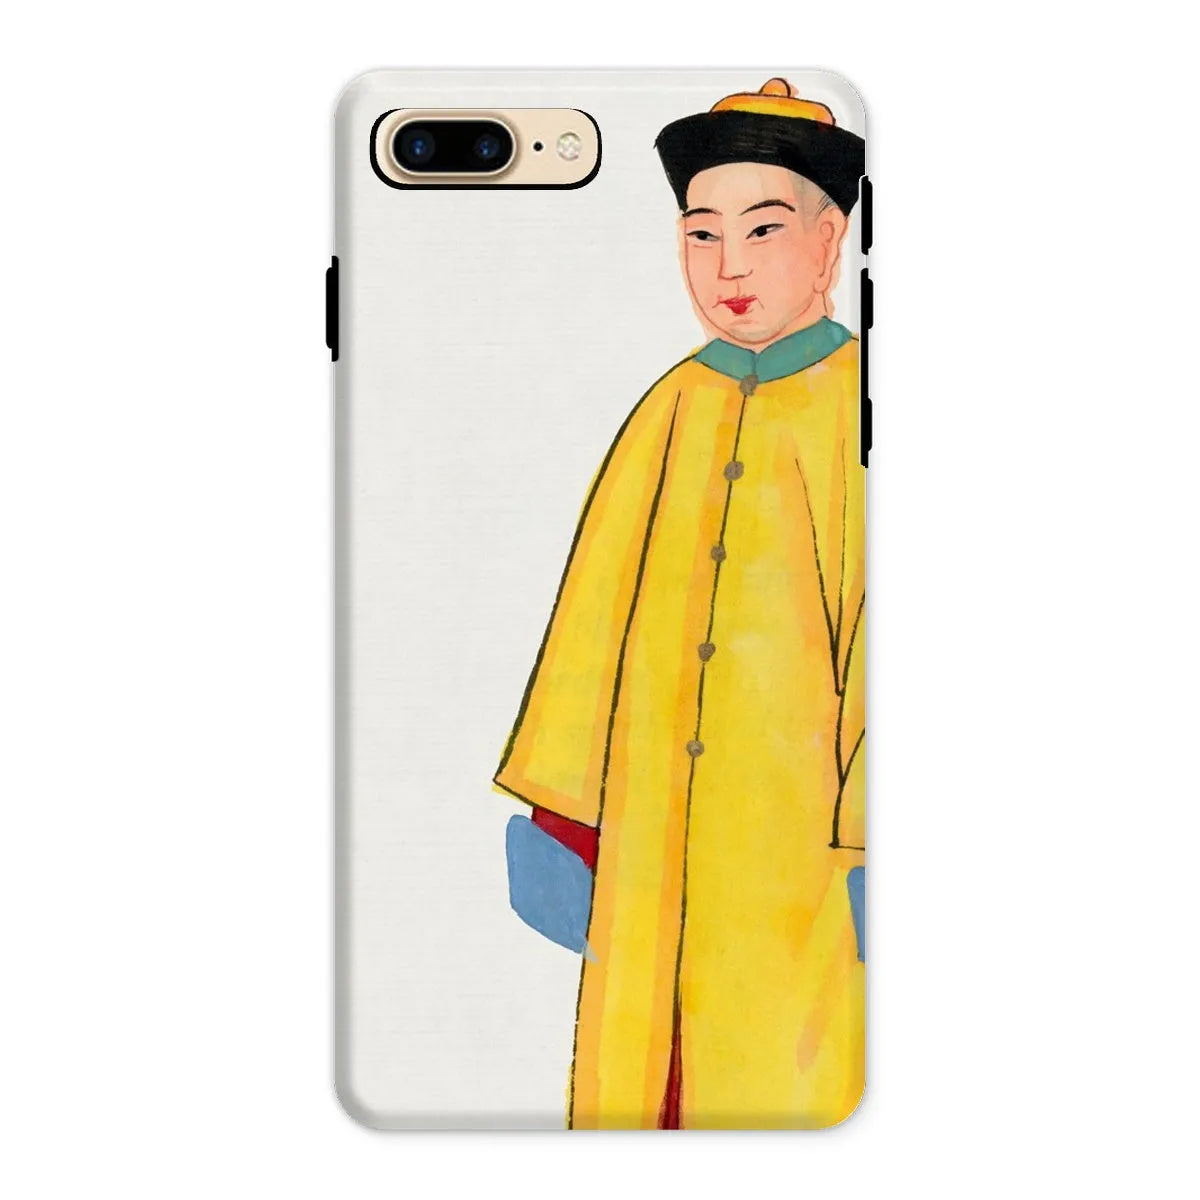 Priest In Yellow Robes - Chinese Aesthetic Art Phone Case - Iphone 8 Plus / Matte - Mobile Phone Cases - Aesthetic Art